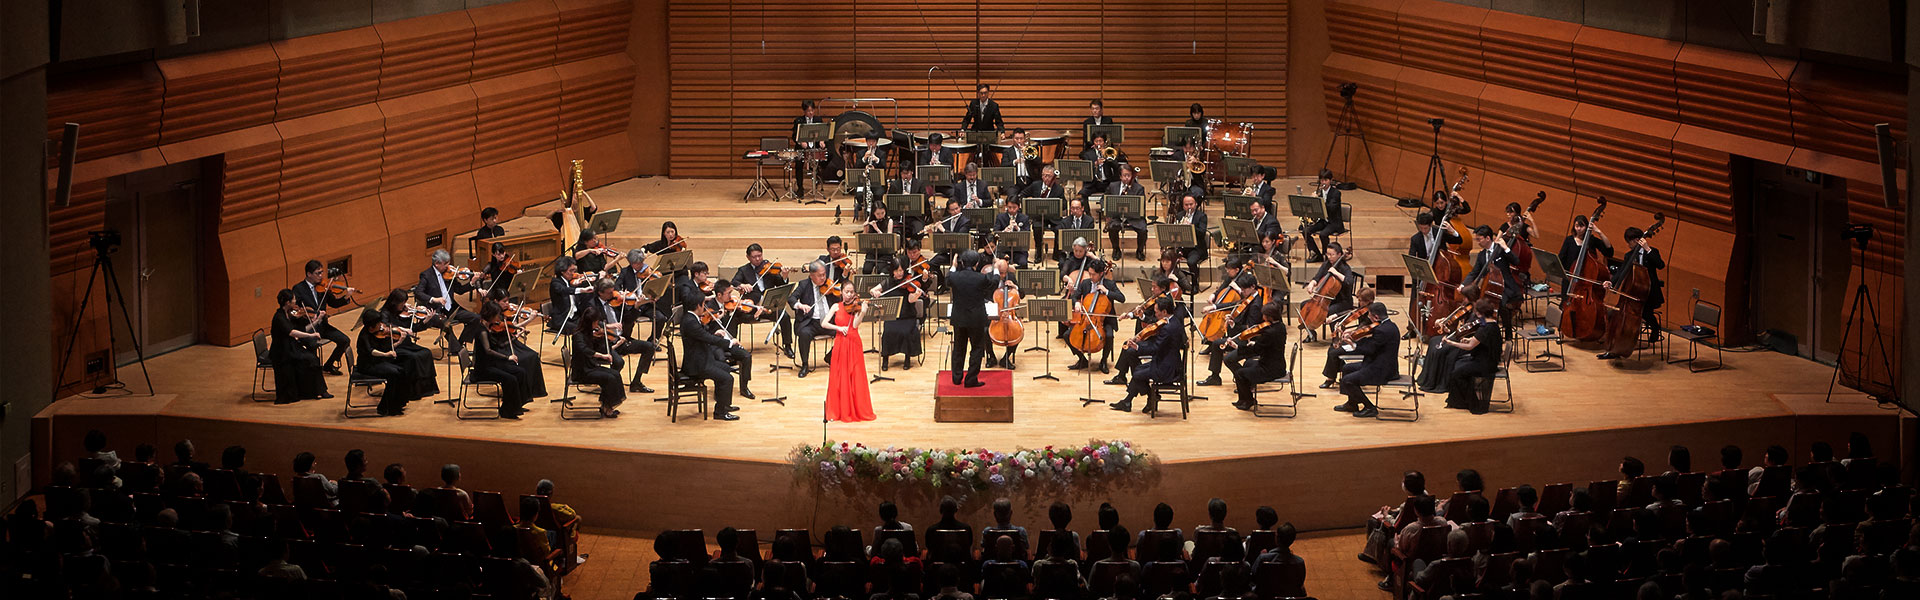 The Kyushu Symphony Orchestra The 361st Subscription Concert | Sendai International Music Competition Official Website